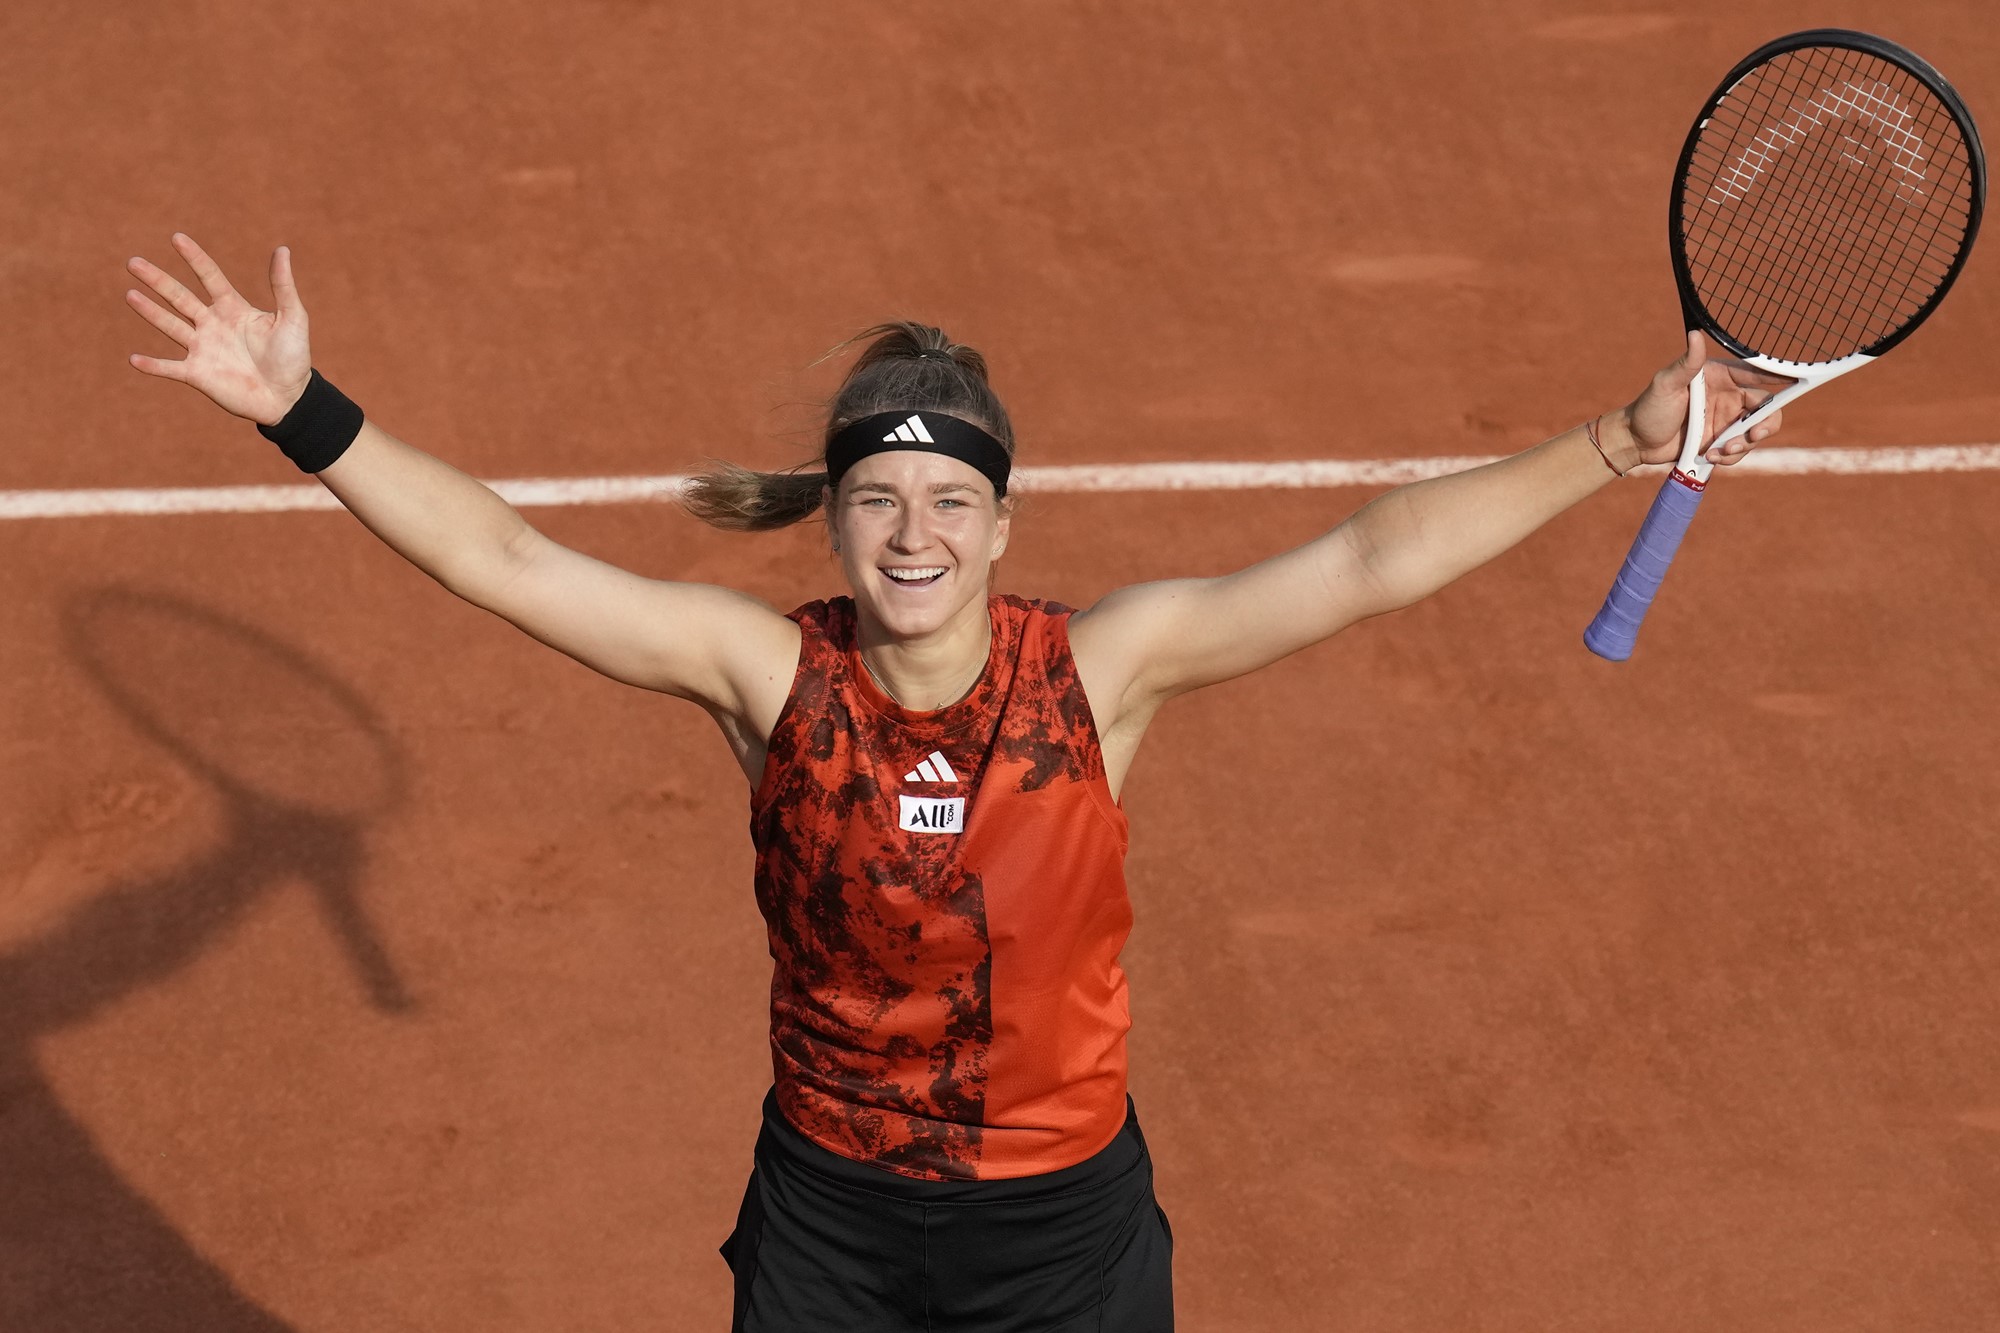 A female tennis player in red raises her arms in celebration on a clay court